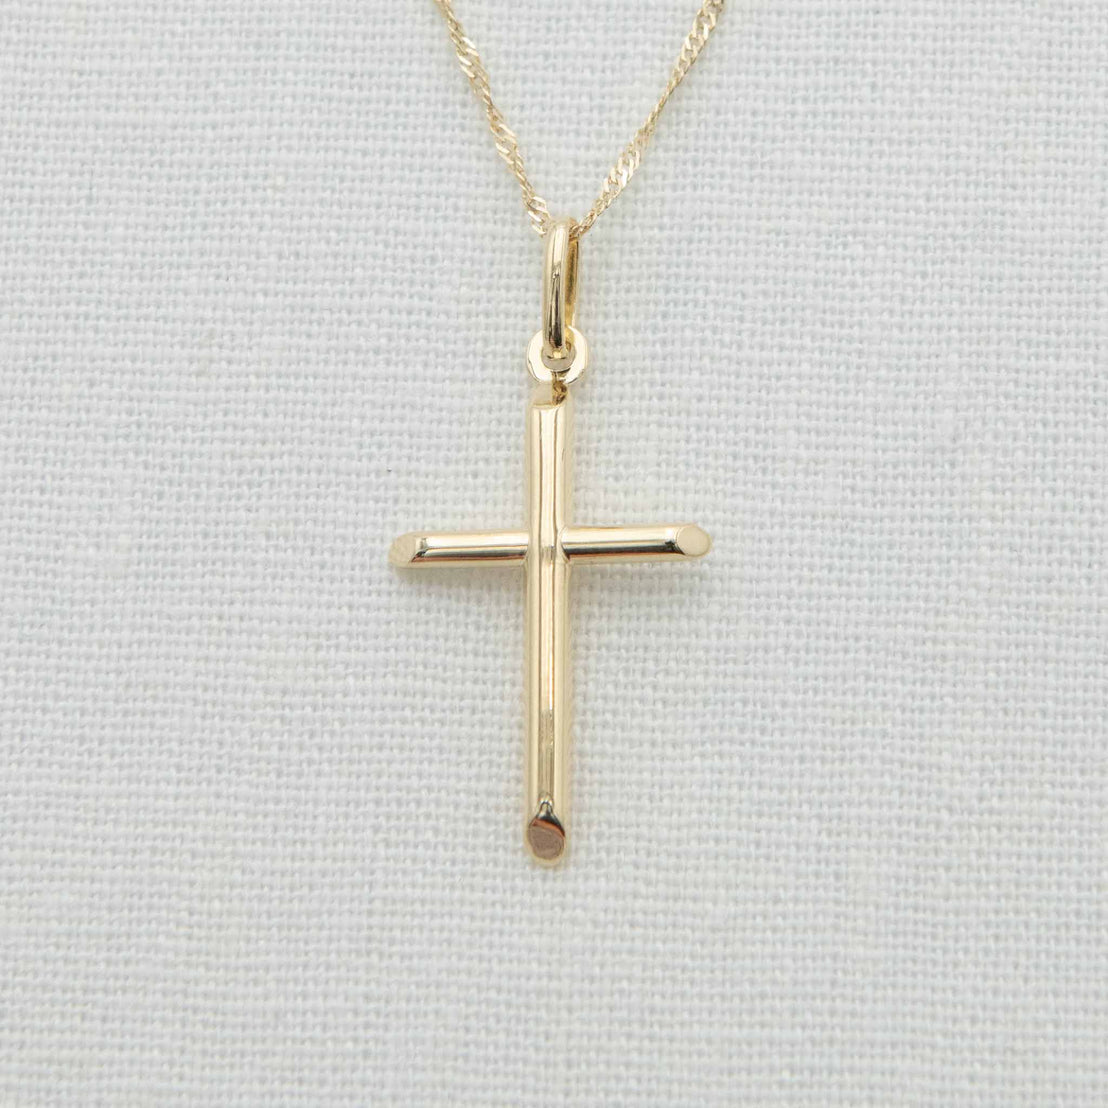 Cylindrical solid gold cross charm with angled ends on chain